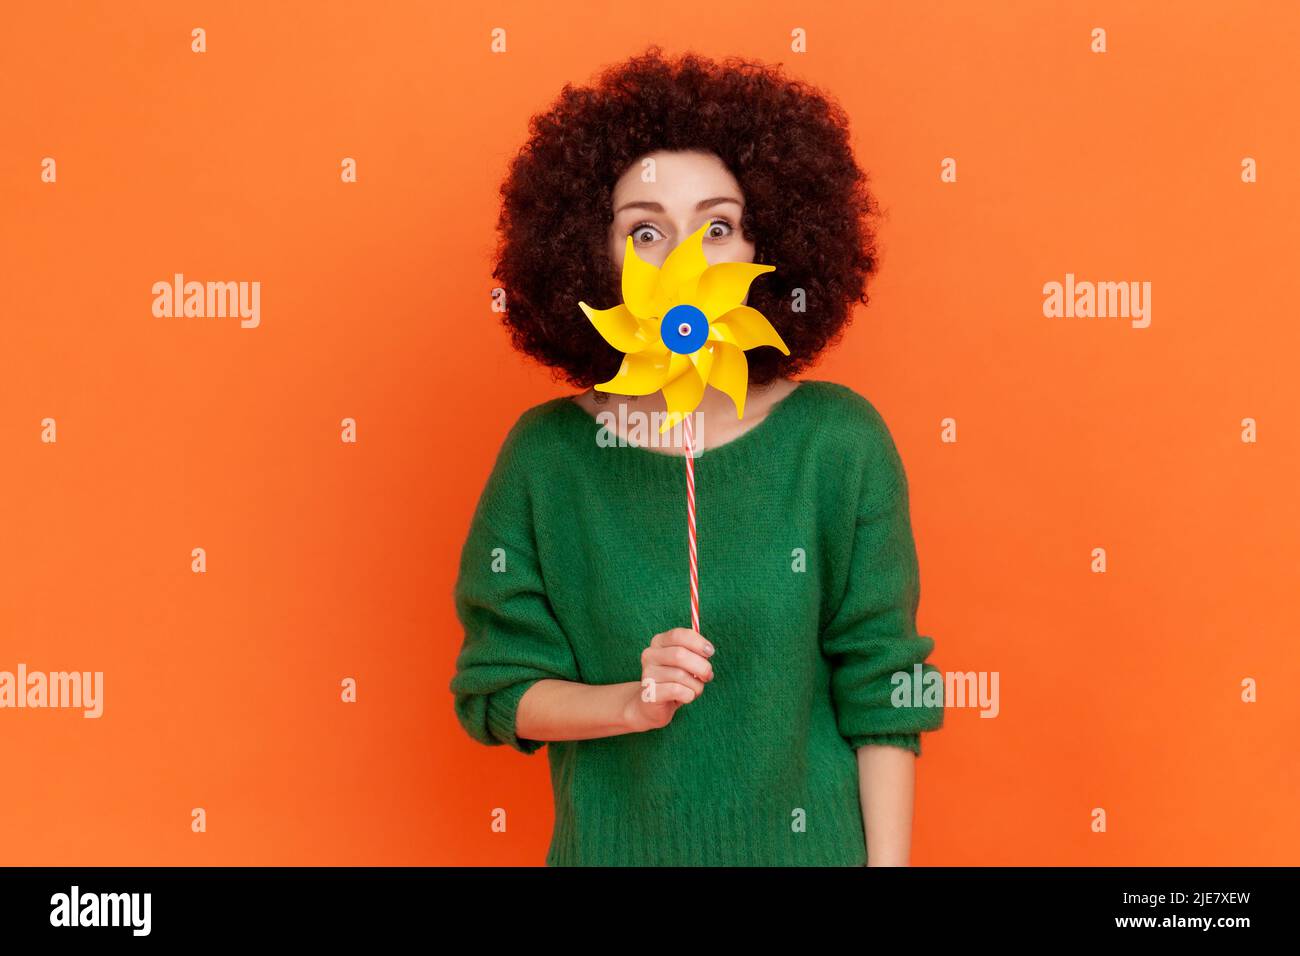 Attractive funny woman with Afro hairstyle wearing green casual style sweater hiding half of her face with yellow windmill, playing, having fun. Indoor studio shot isolated on orange background. Stock Photo